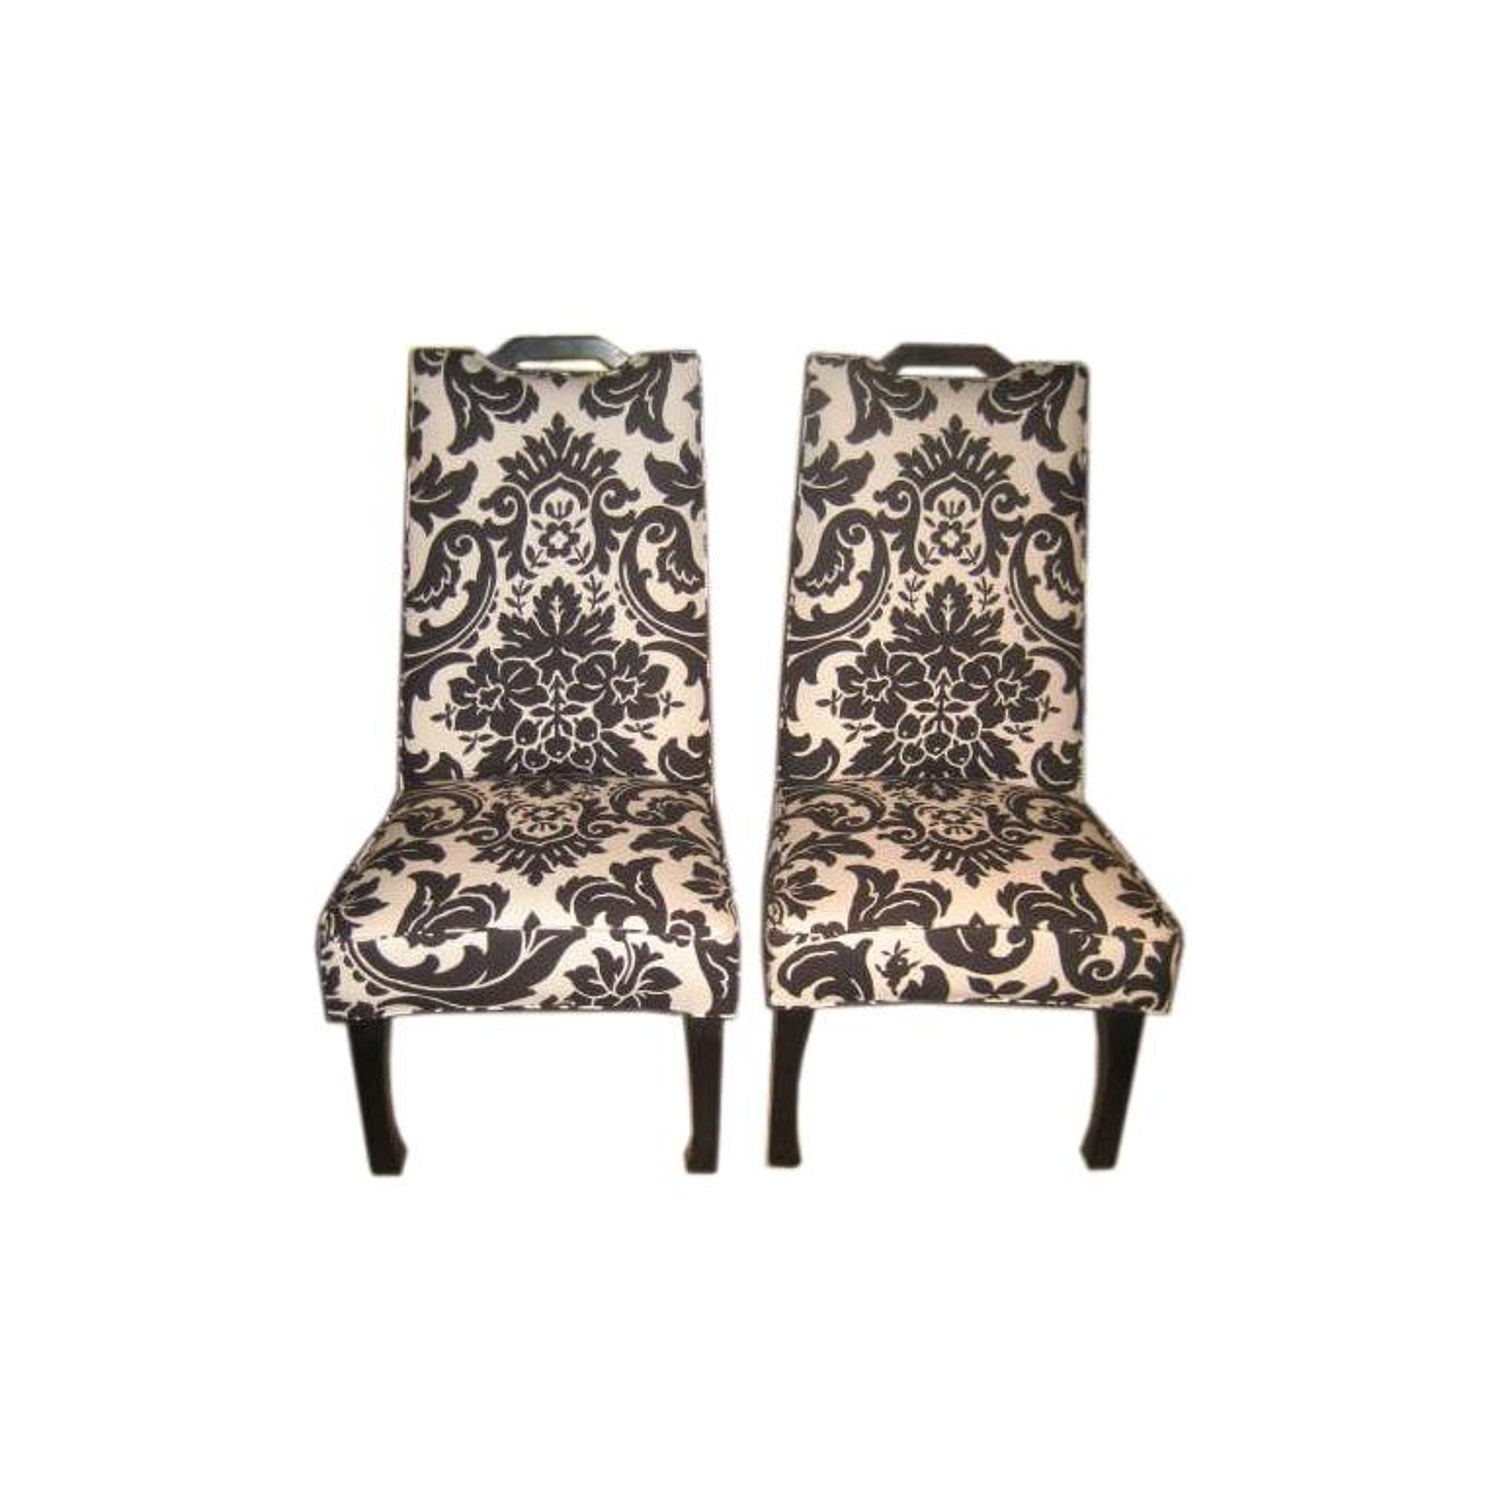 A Pair Of Tall Upholstered Chairs For Sale At 1stdibs